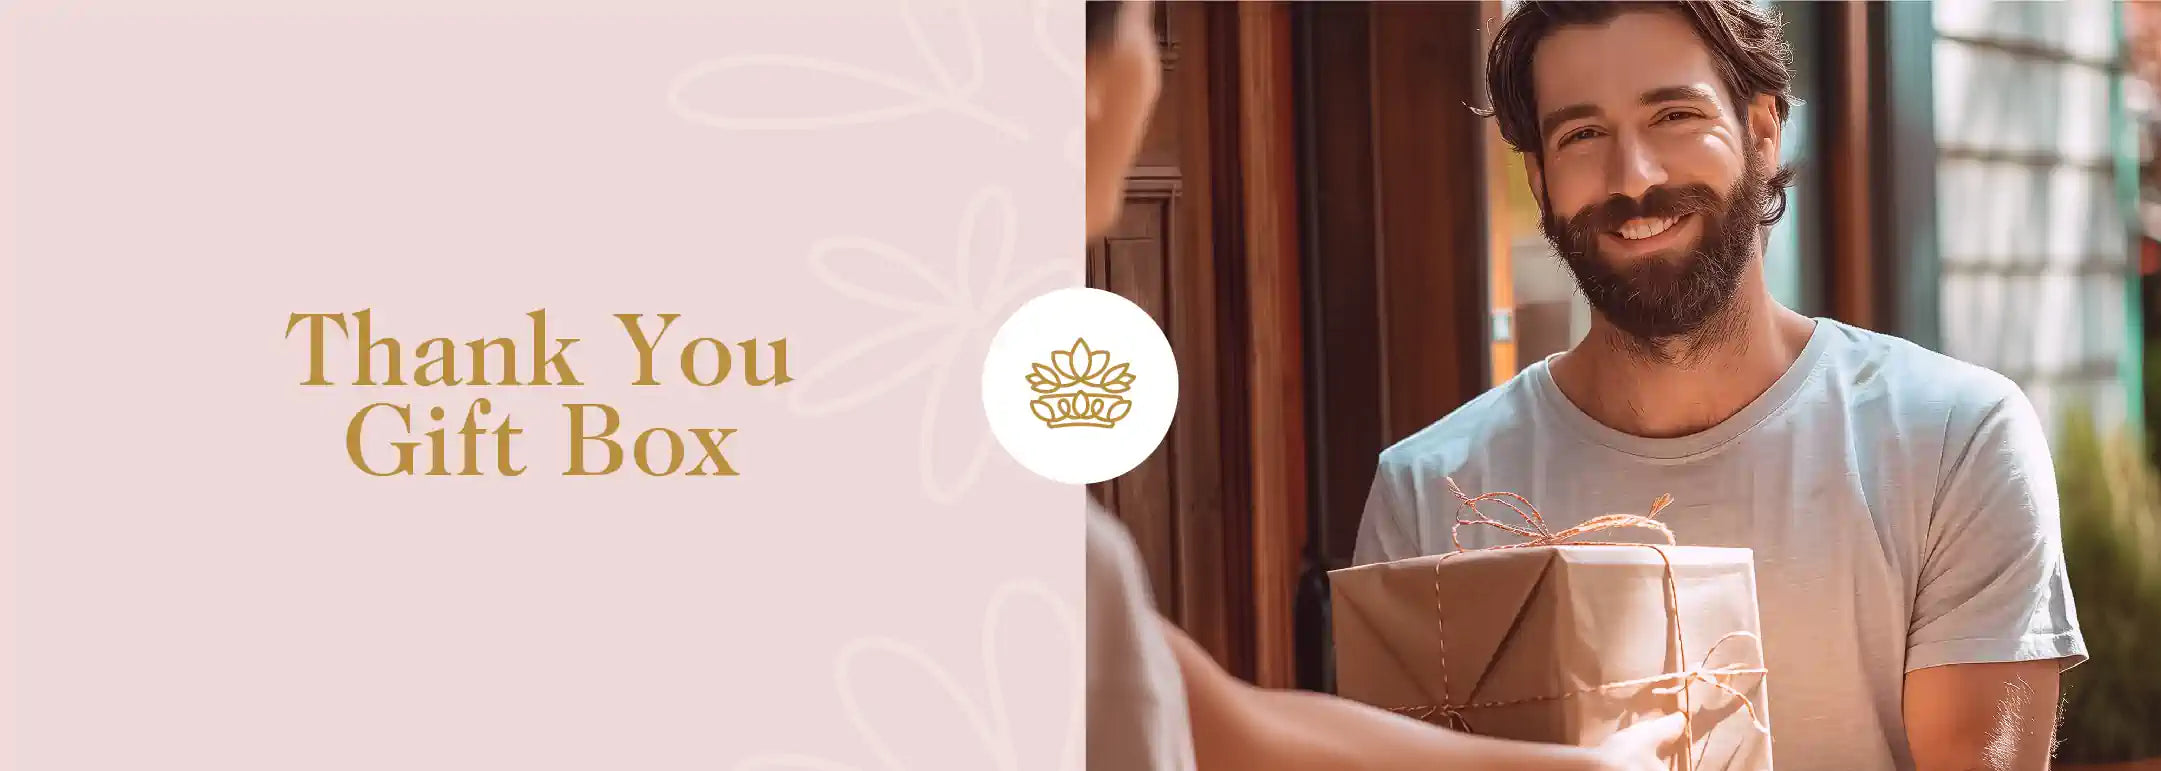 A smiling man with a beard receiving a beautifully wrapped thank you gift box at his doorstep, surrounded by a warm, sunlit setting. Thank You Gift Boxes Collection by Fabulous Flowers and Gifts.